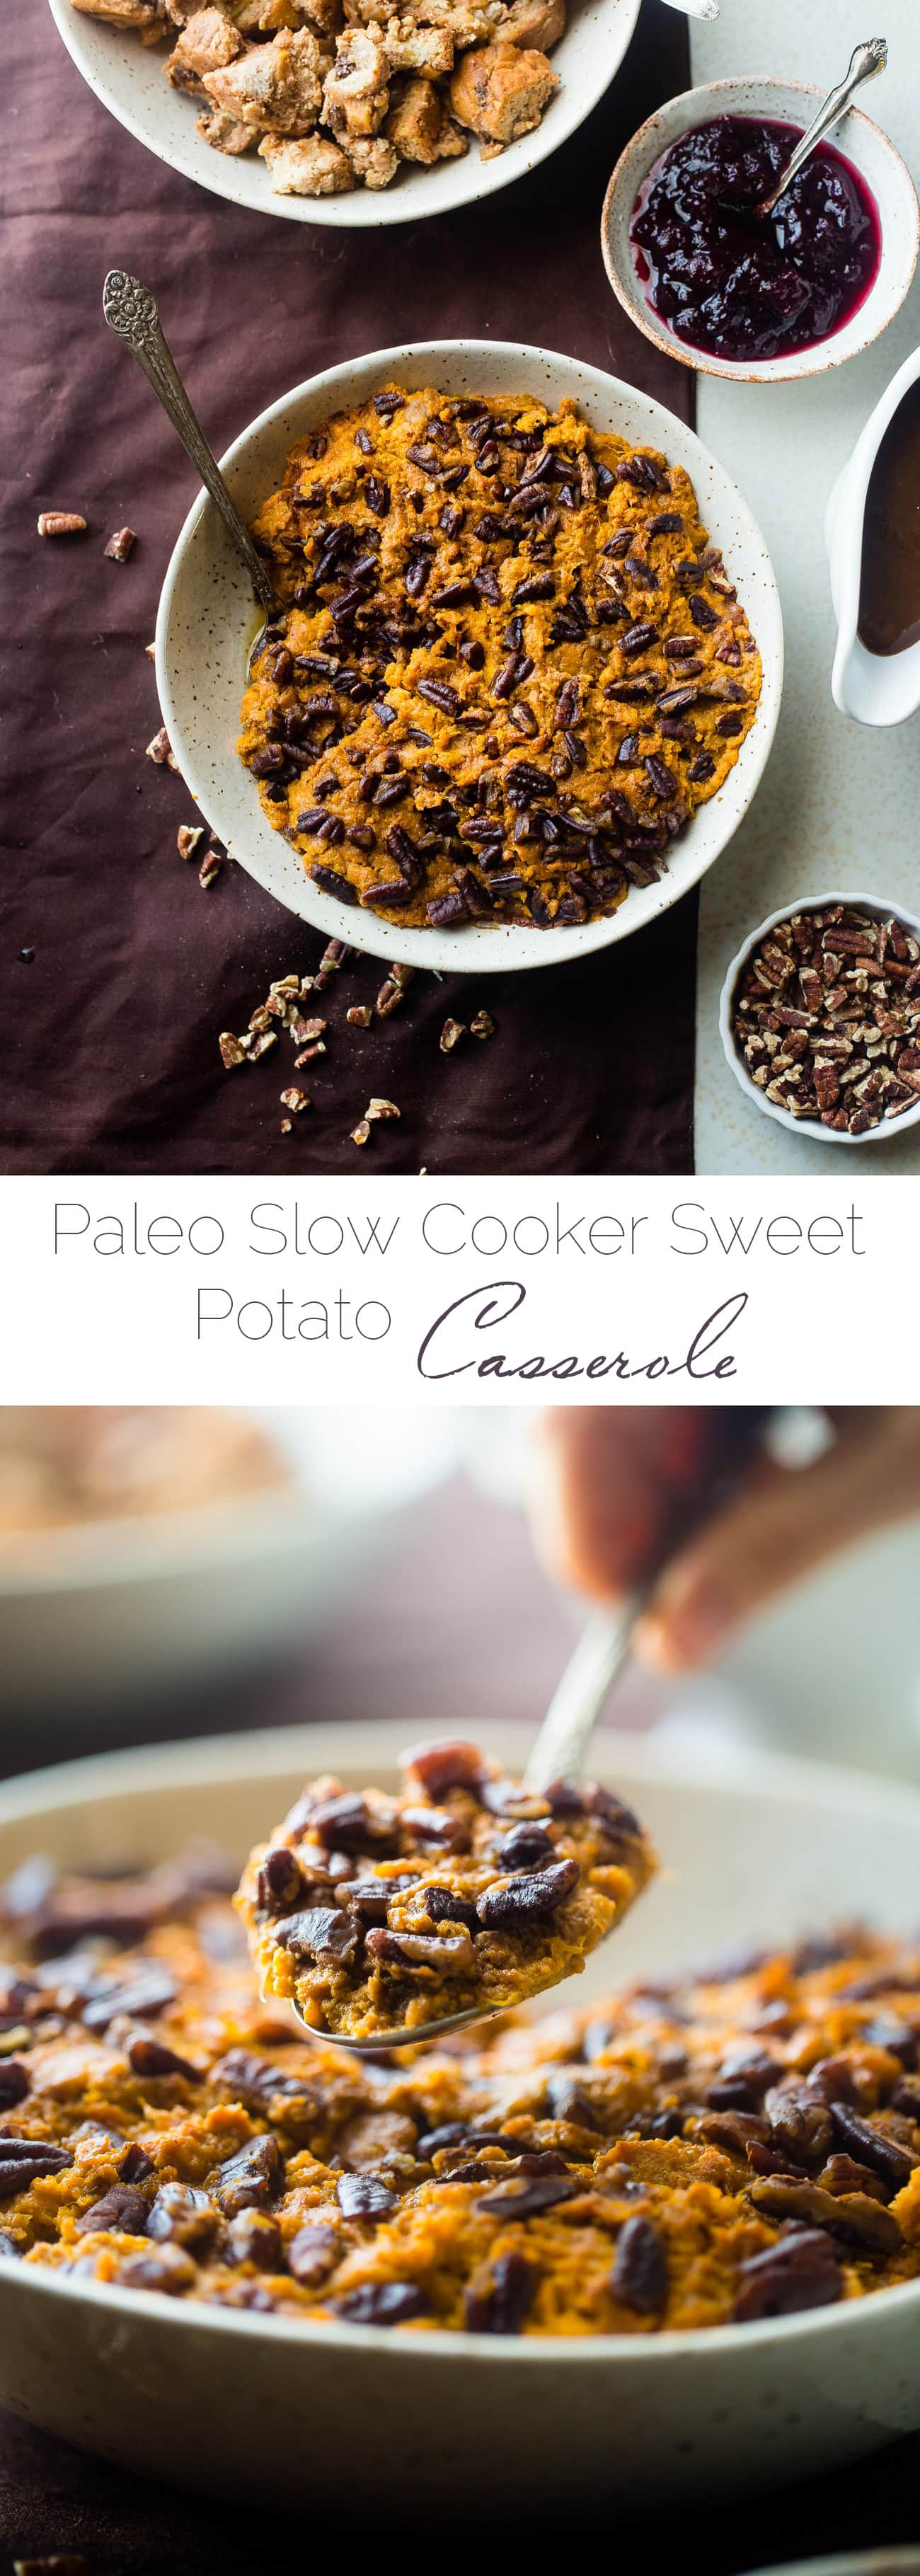 Slow Cooker Paleo Sweet Potato Casserole - Let the slow cooker do all the work for you this Thanksgiving with this quick and easy paleo sweet potato casserole! You won't even miss the marshmallows! | Foodfaithfitness.com | @FoodFaithFit